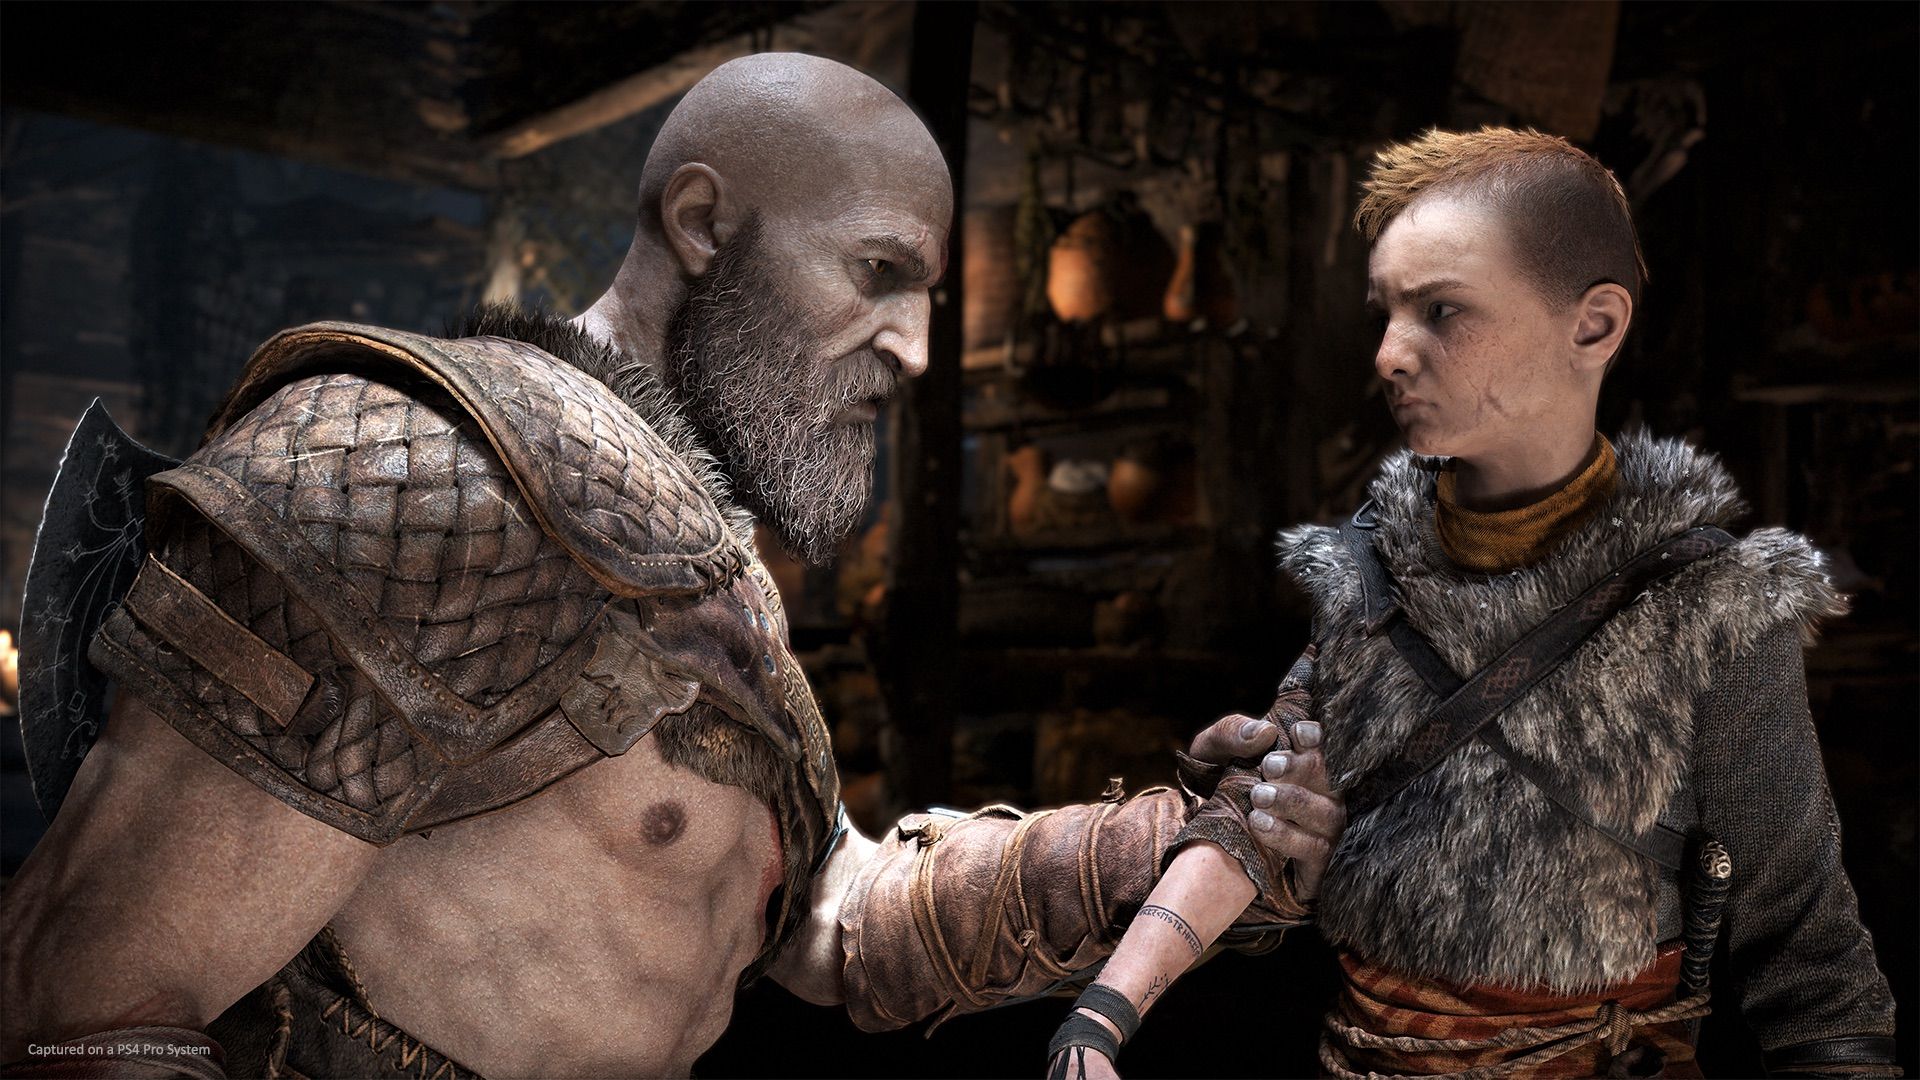 God of War: Ragnarok' release date, trailer, and plot for the PS5 game